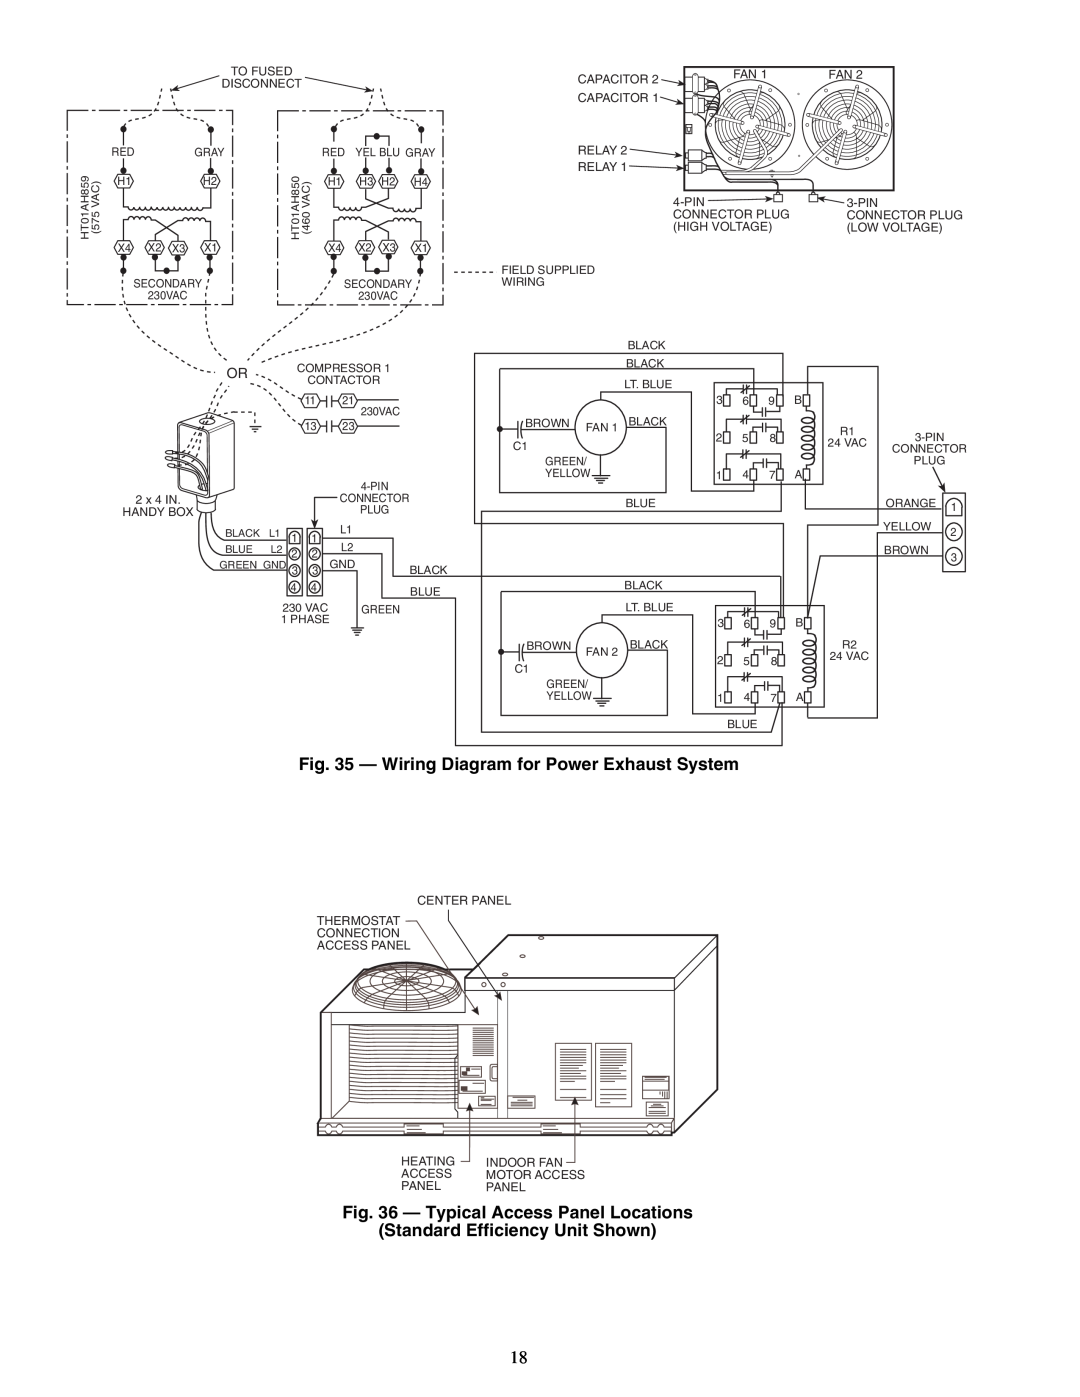 Carrier 48TJD, TJE Wiring Diagram for Power Exhaust System, Typical Access Panel Locations, Standard Efficiency Unit Shown 